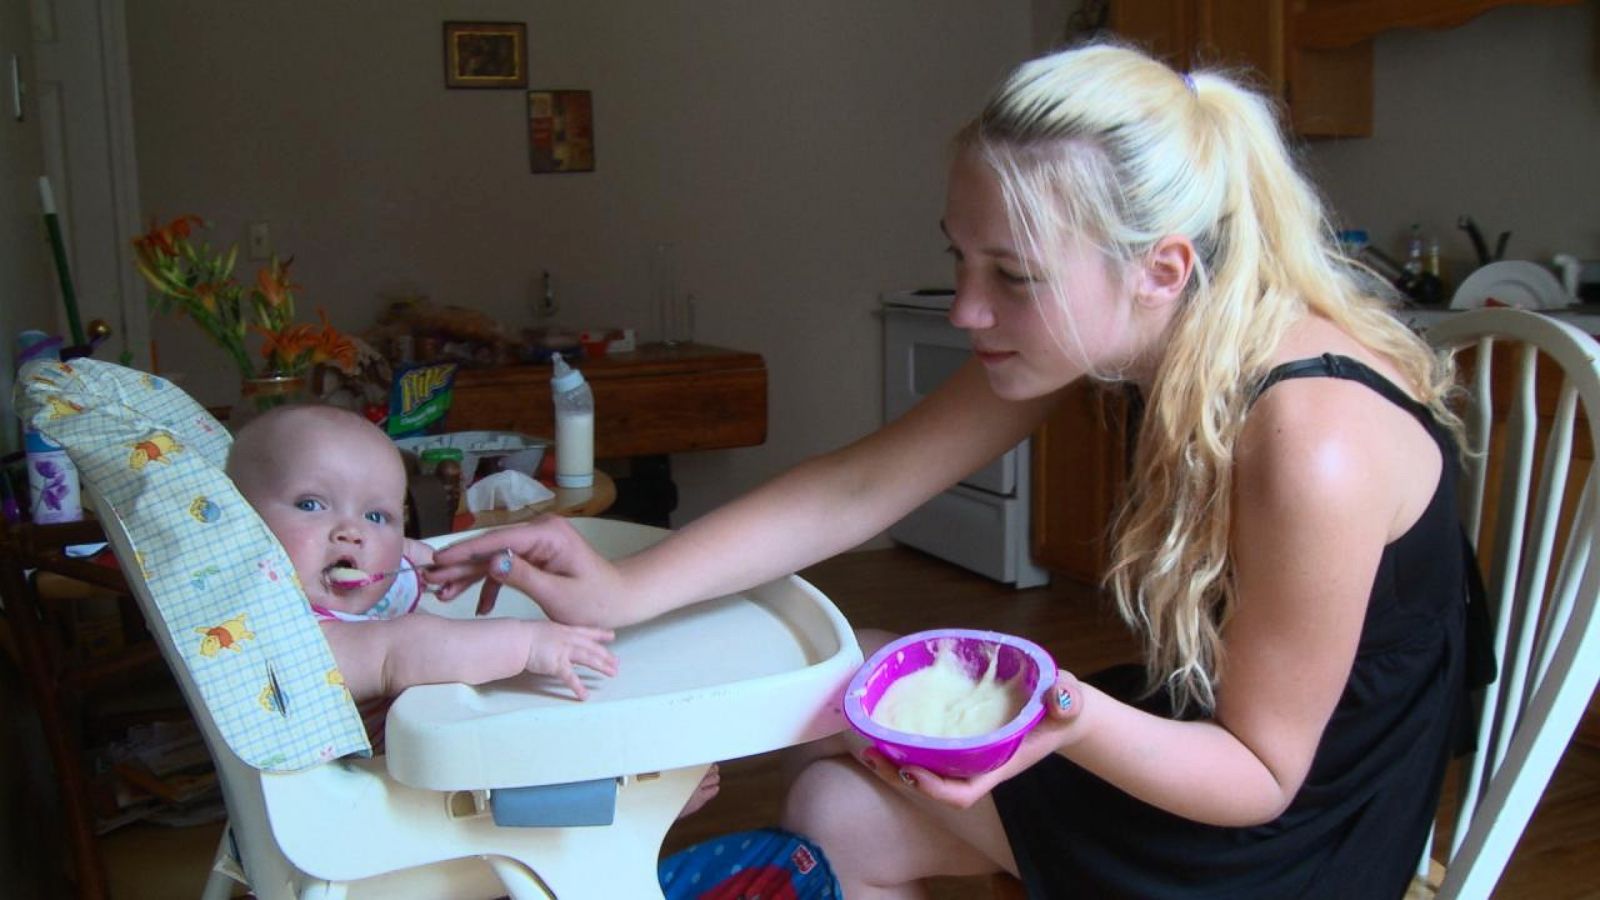 Breaking Point: Young Parents Choosing Between Heroin and Getting Clean